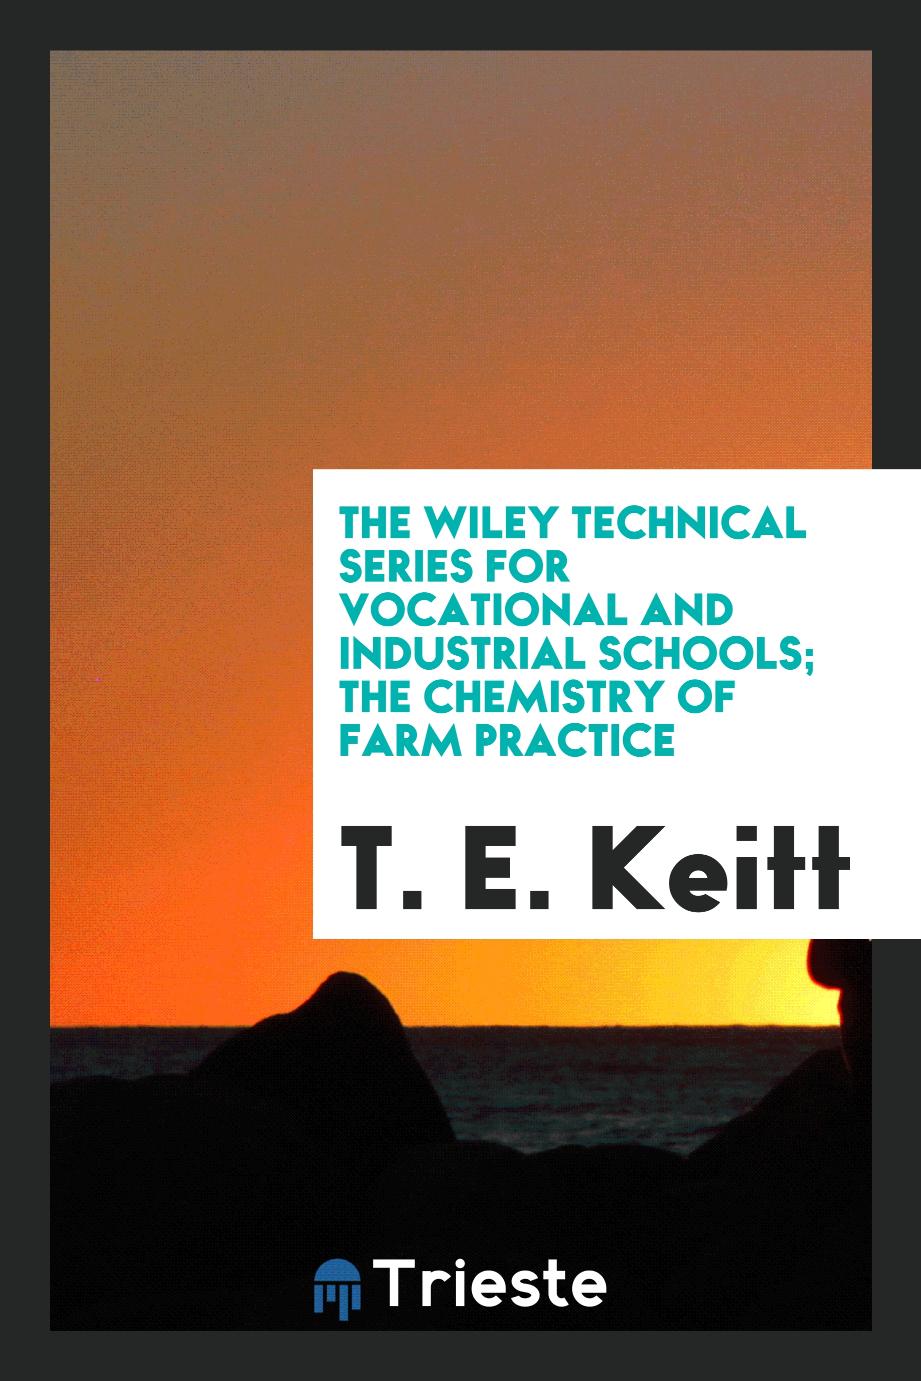 The Wiley Technical series for vocational and industrial schools; The chemistry of farm practice